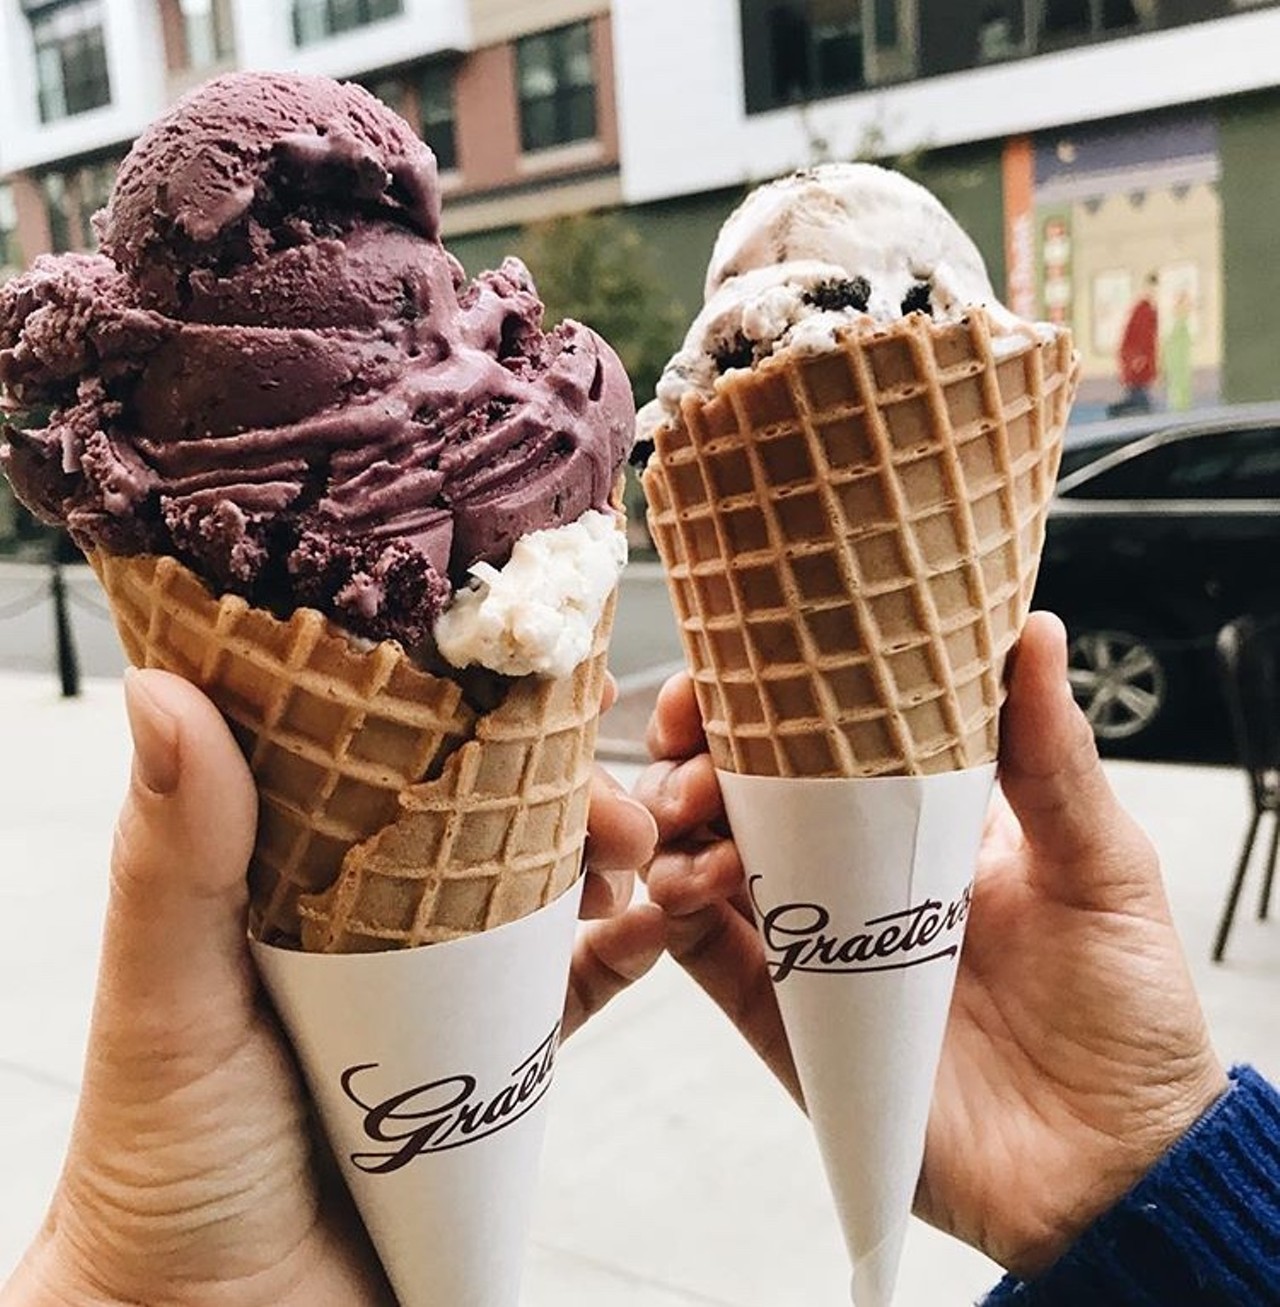 Graeter’s
10 Park Ave. Suite 116, Beachwood and 261 Main St., Westlake
Yeah, it may be a Cincinnati thing, but Graeter’s is so delicious that we have to include it here. Known for their giant chocolate chunks in their ice cream, we’re glad they came to town. 
